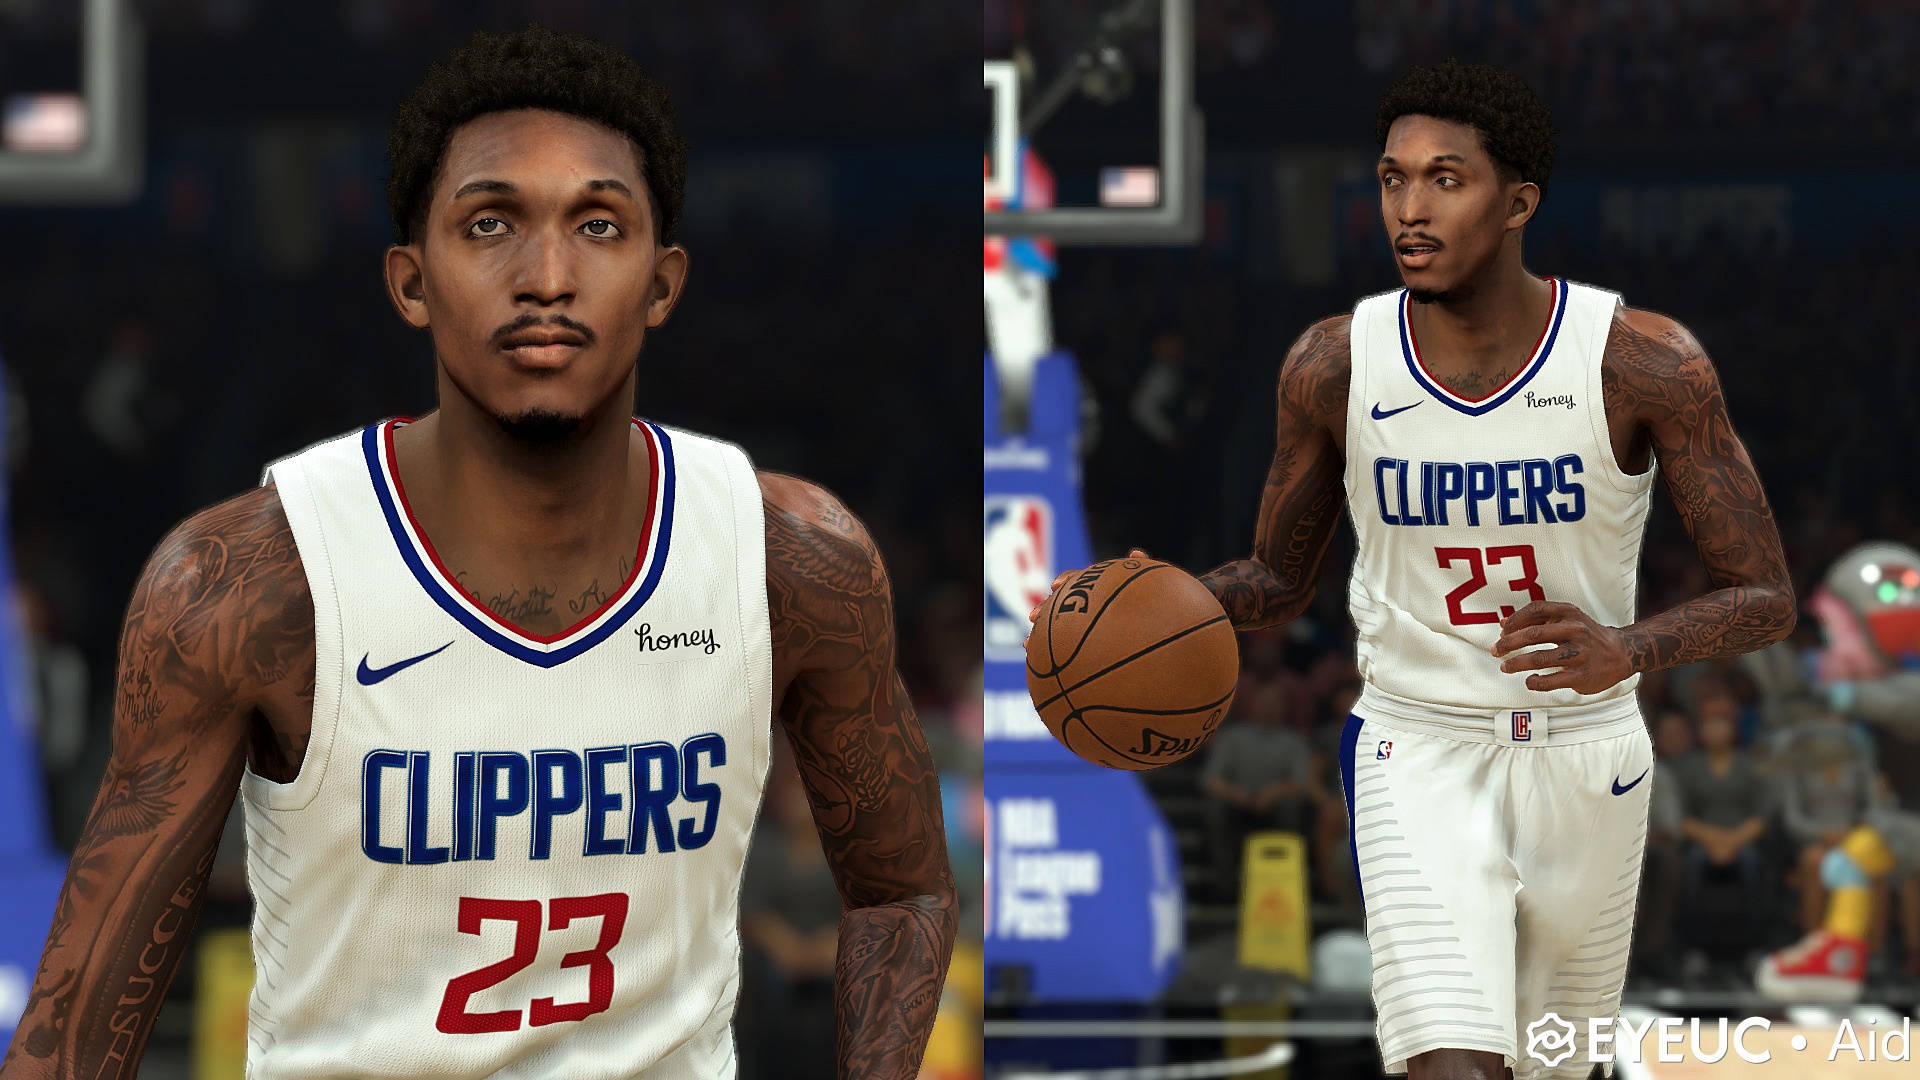 Lou Williams As A 2k Player